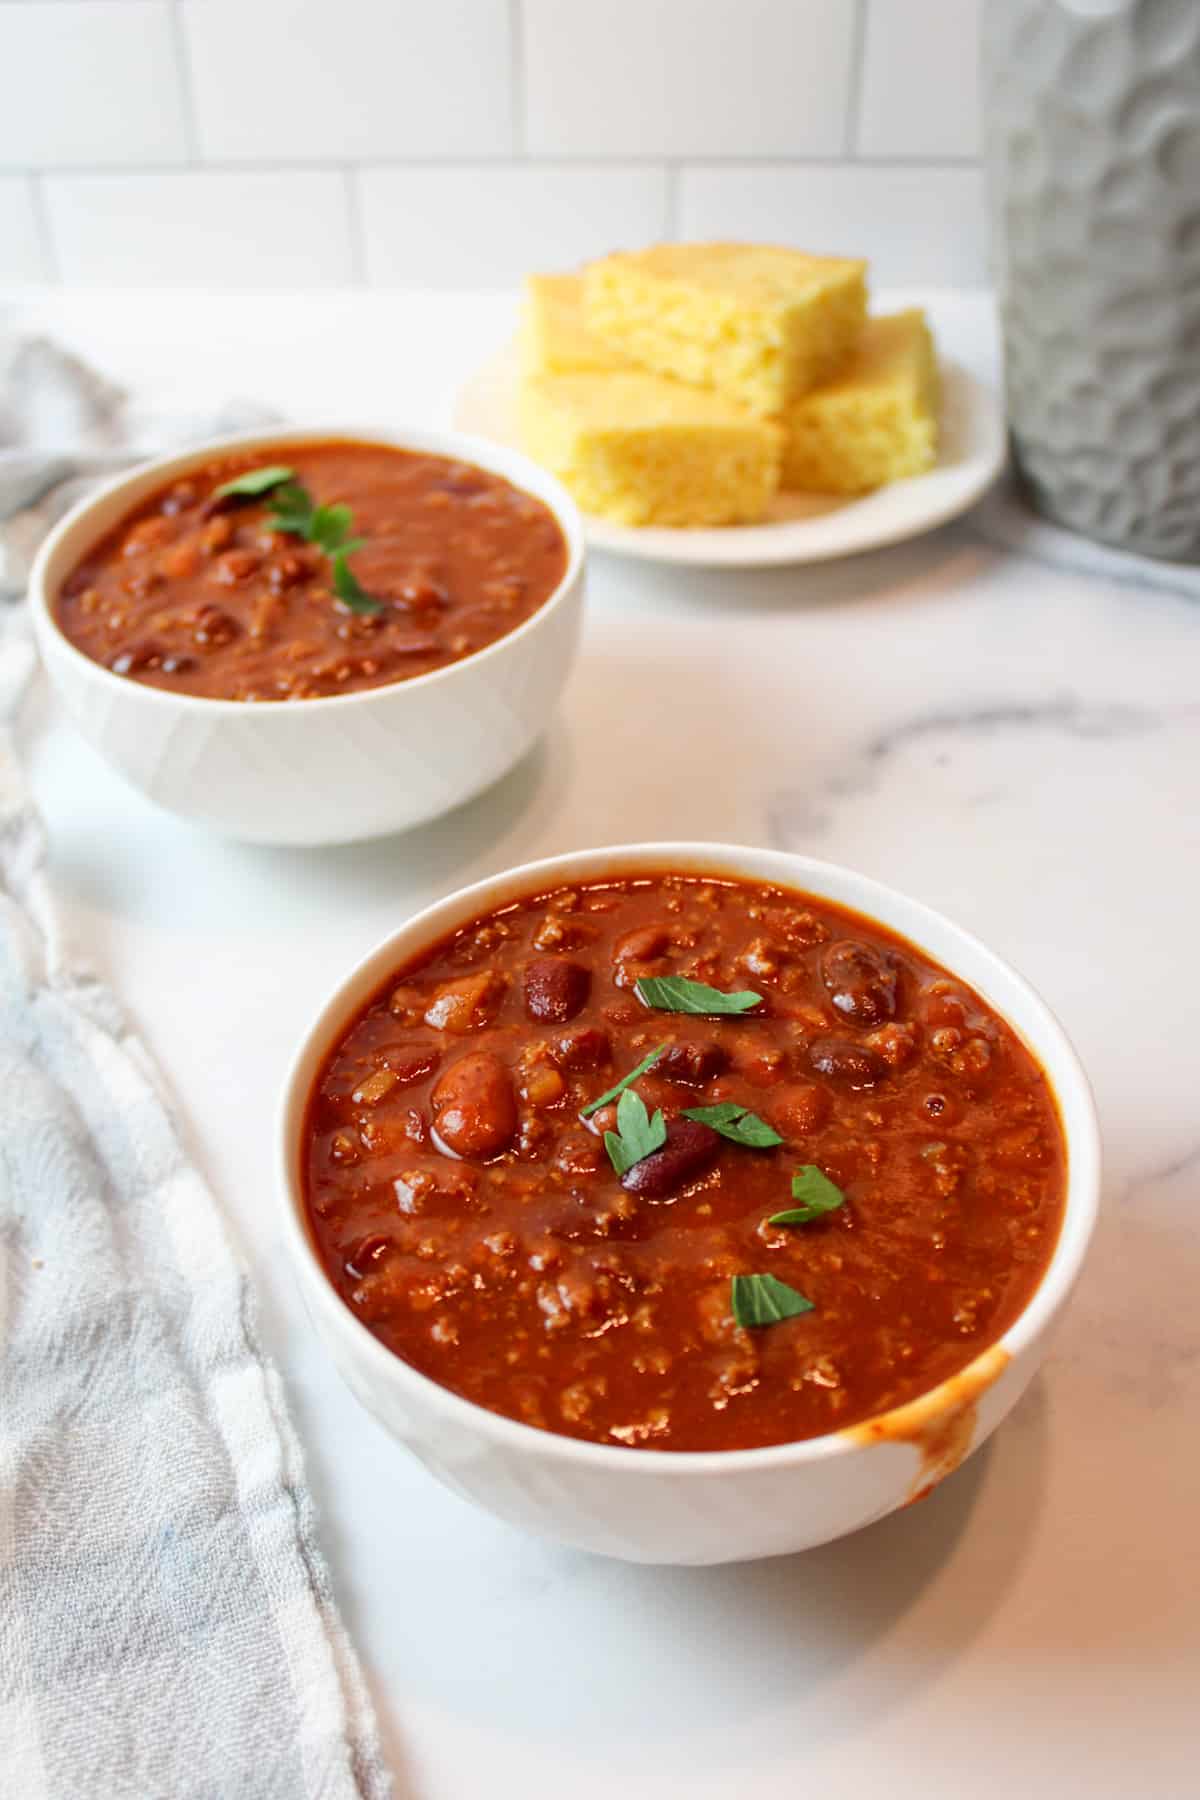 two bowls of tomato soup chili with a plate of cornbread in the background.